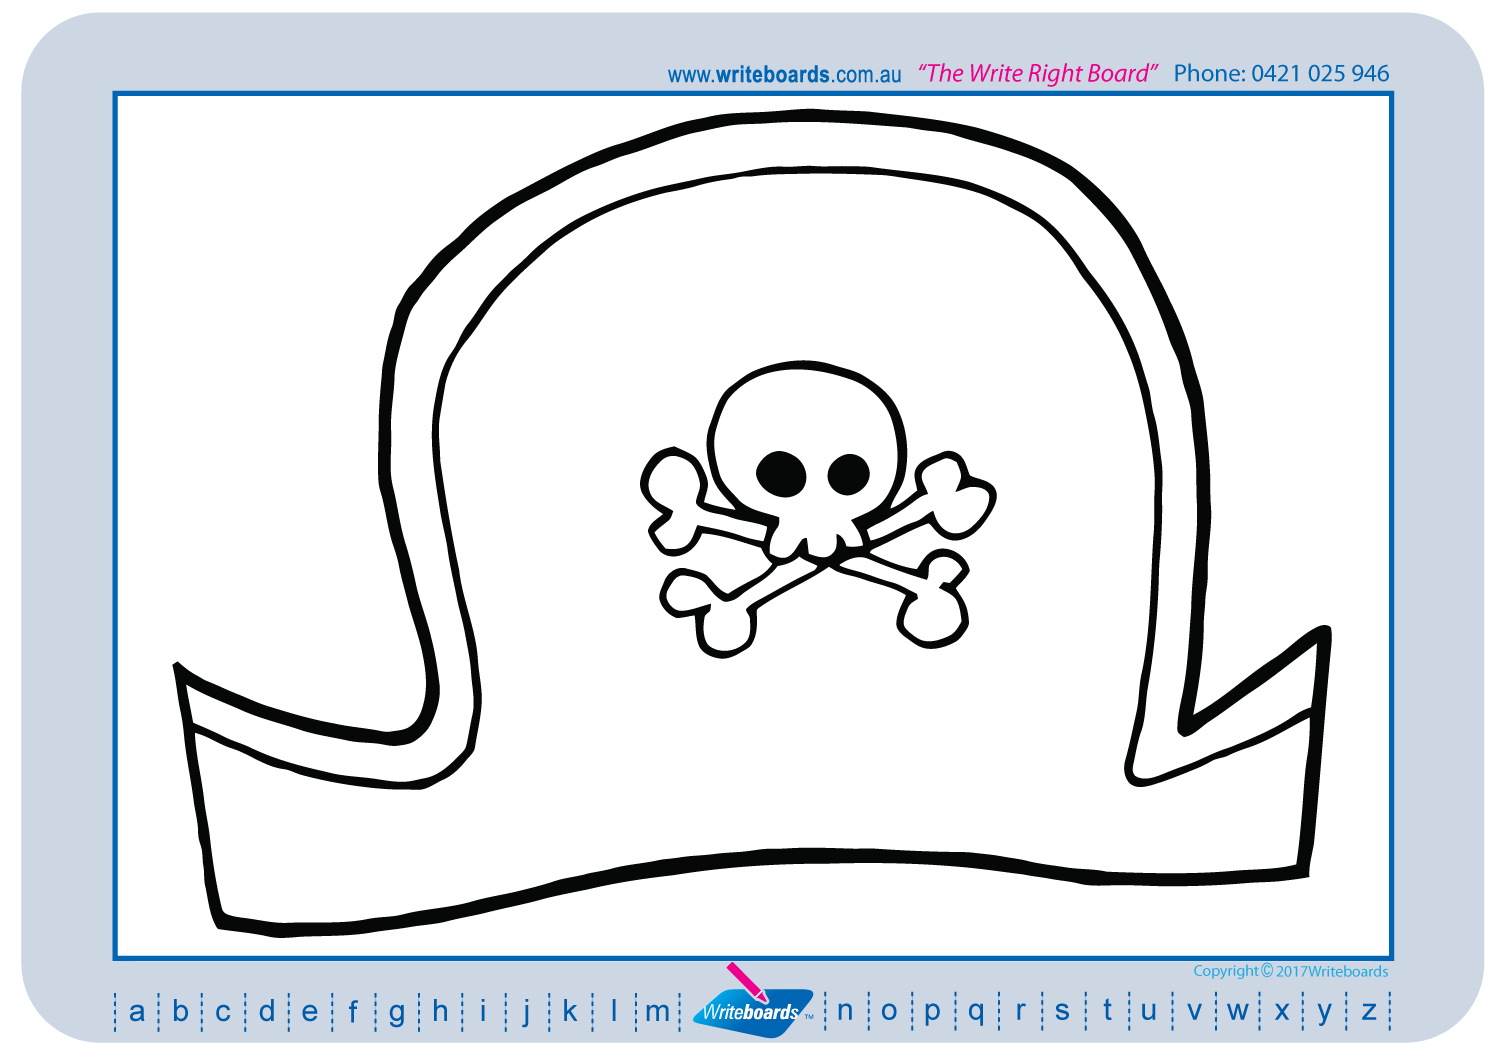 Pirate related drawing worksheets childrens writing board